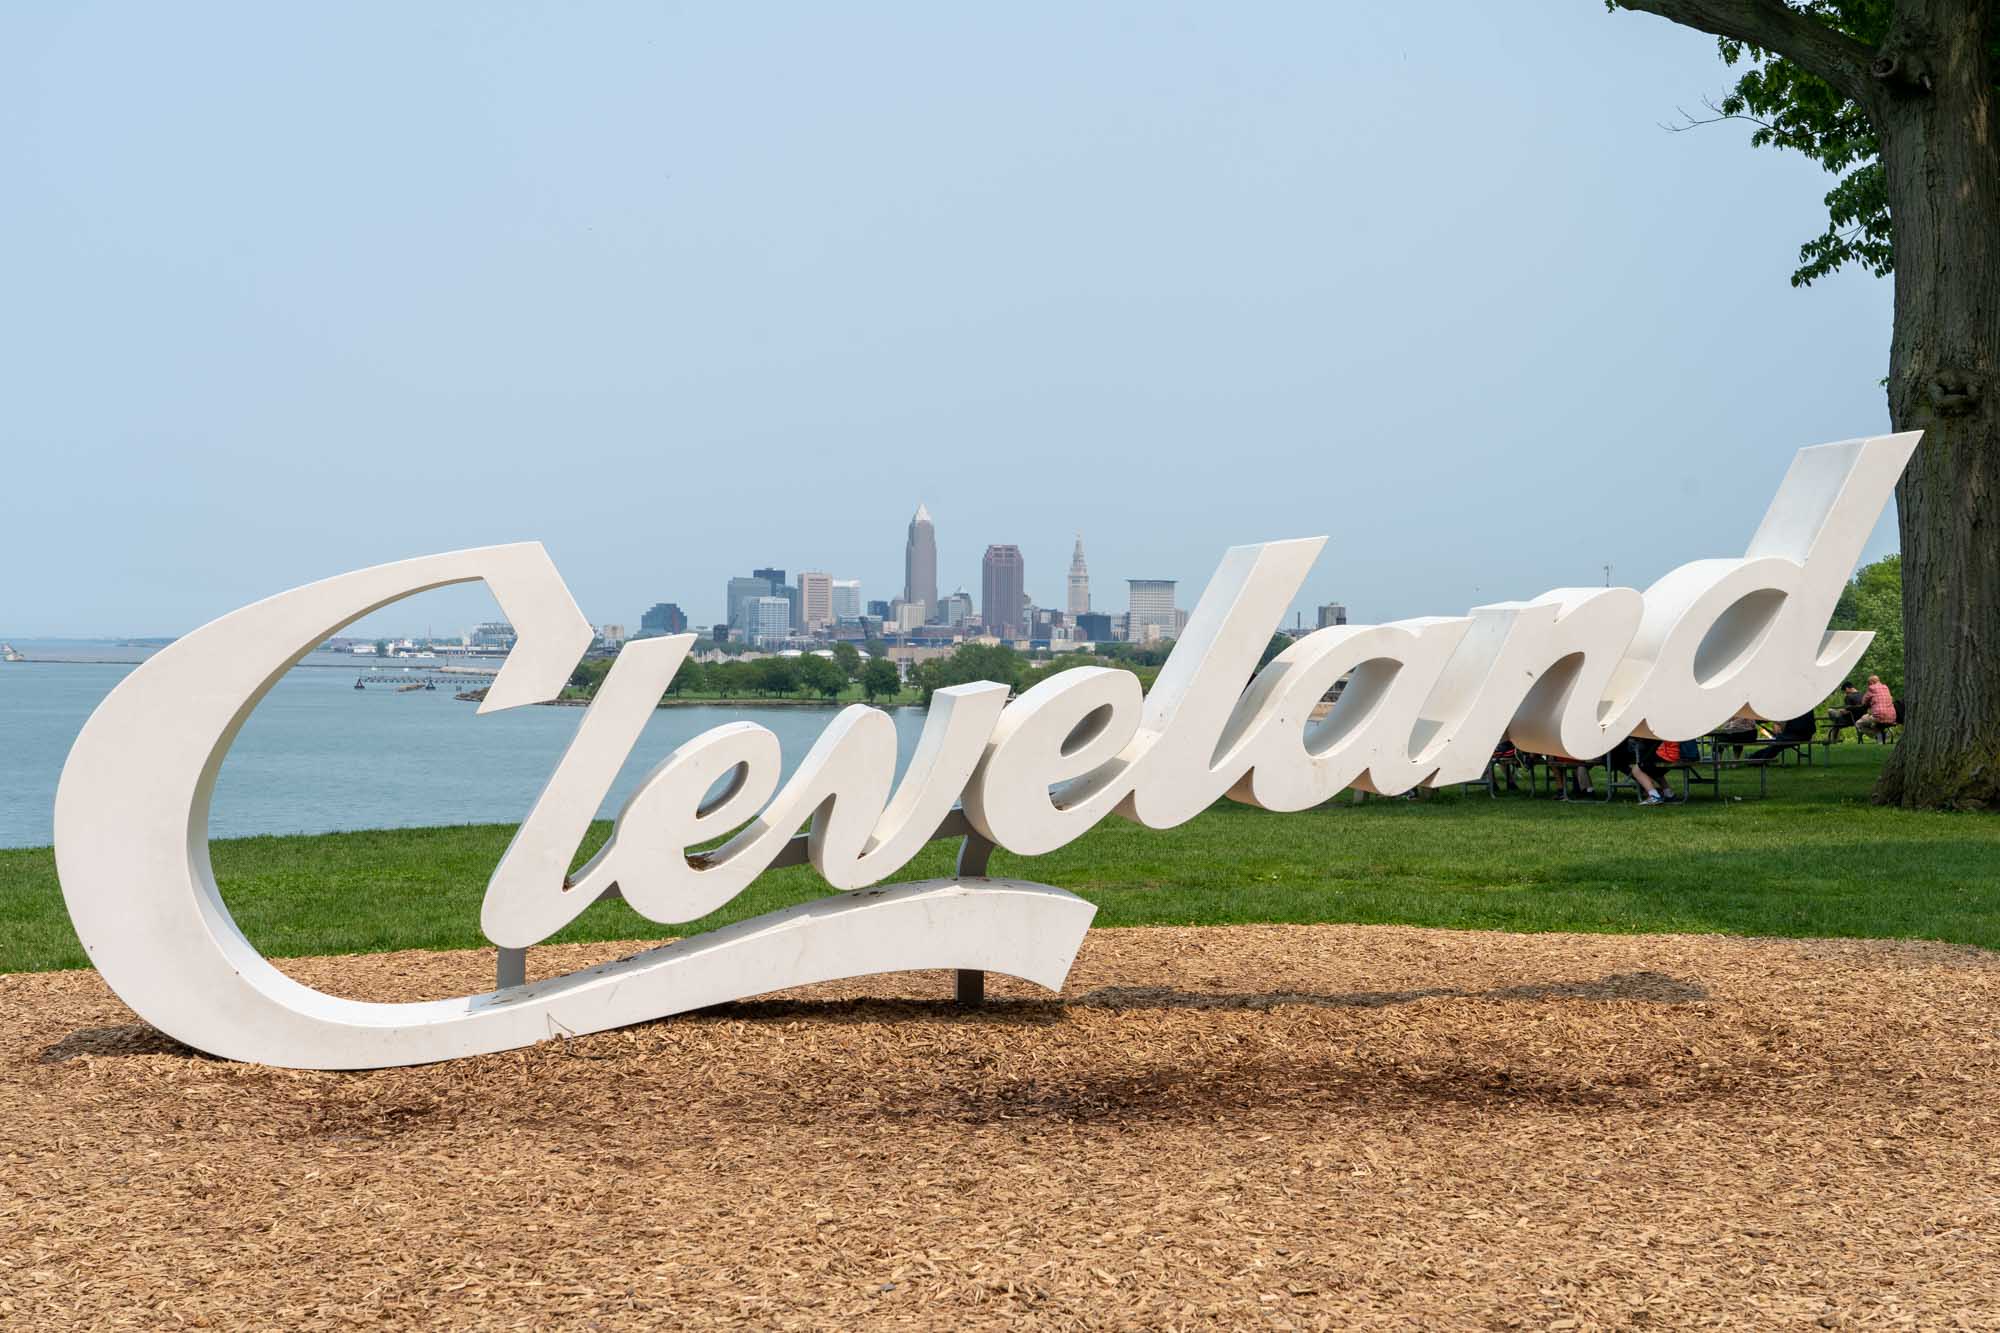 Read more about the article The Cleveland Script Signs and Where to Find Them